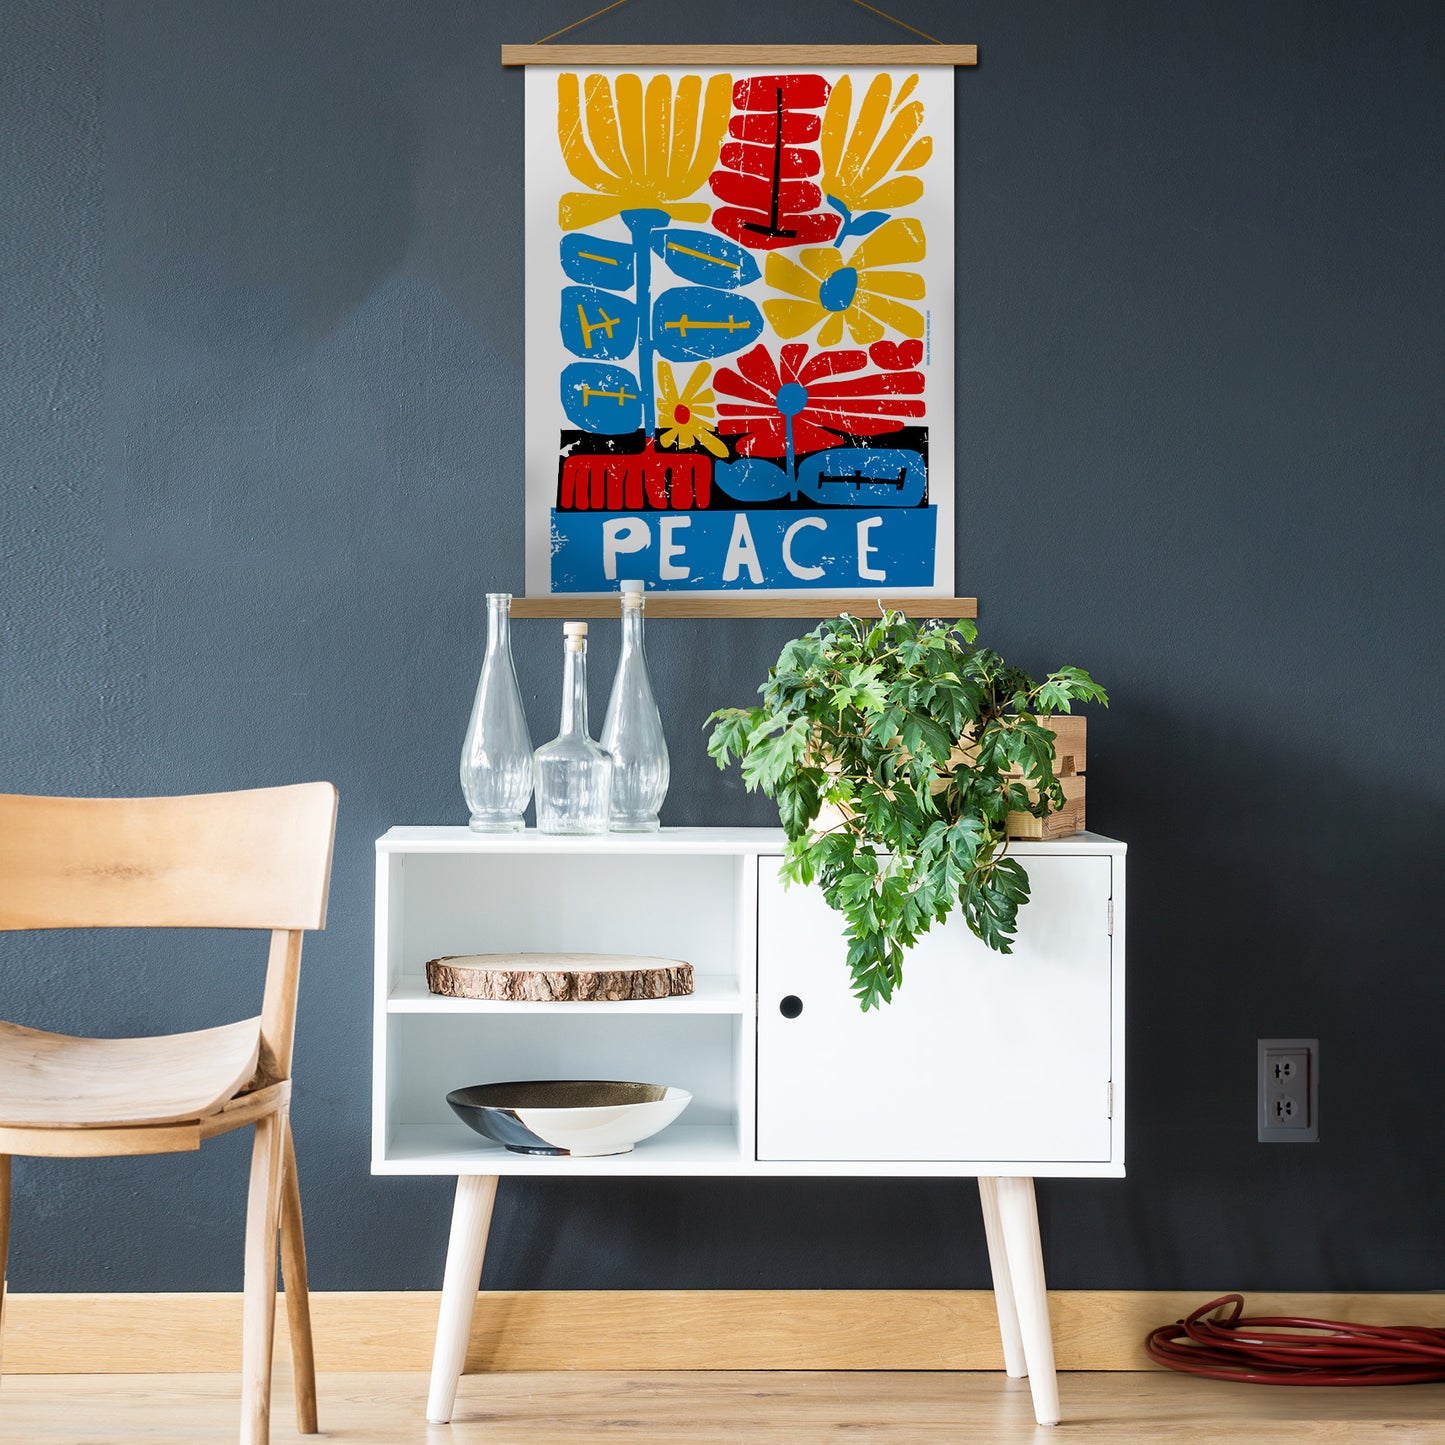 Colorful Wall Decoration Peace Art Poster